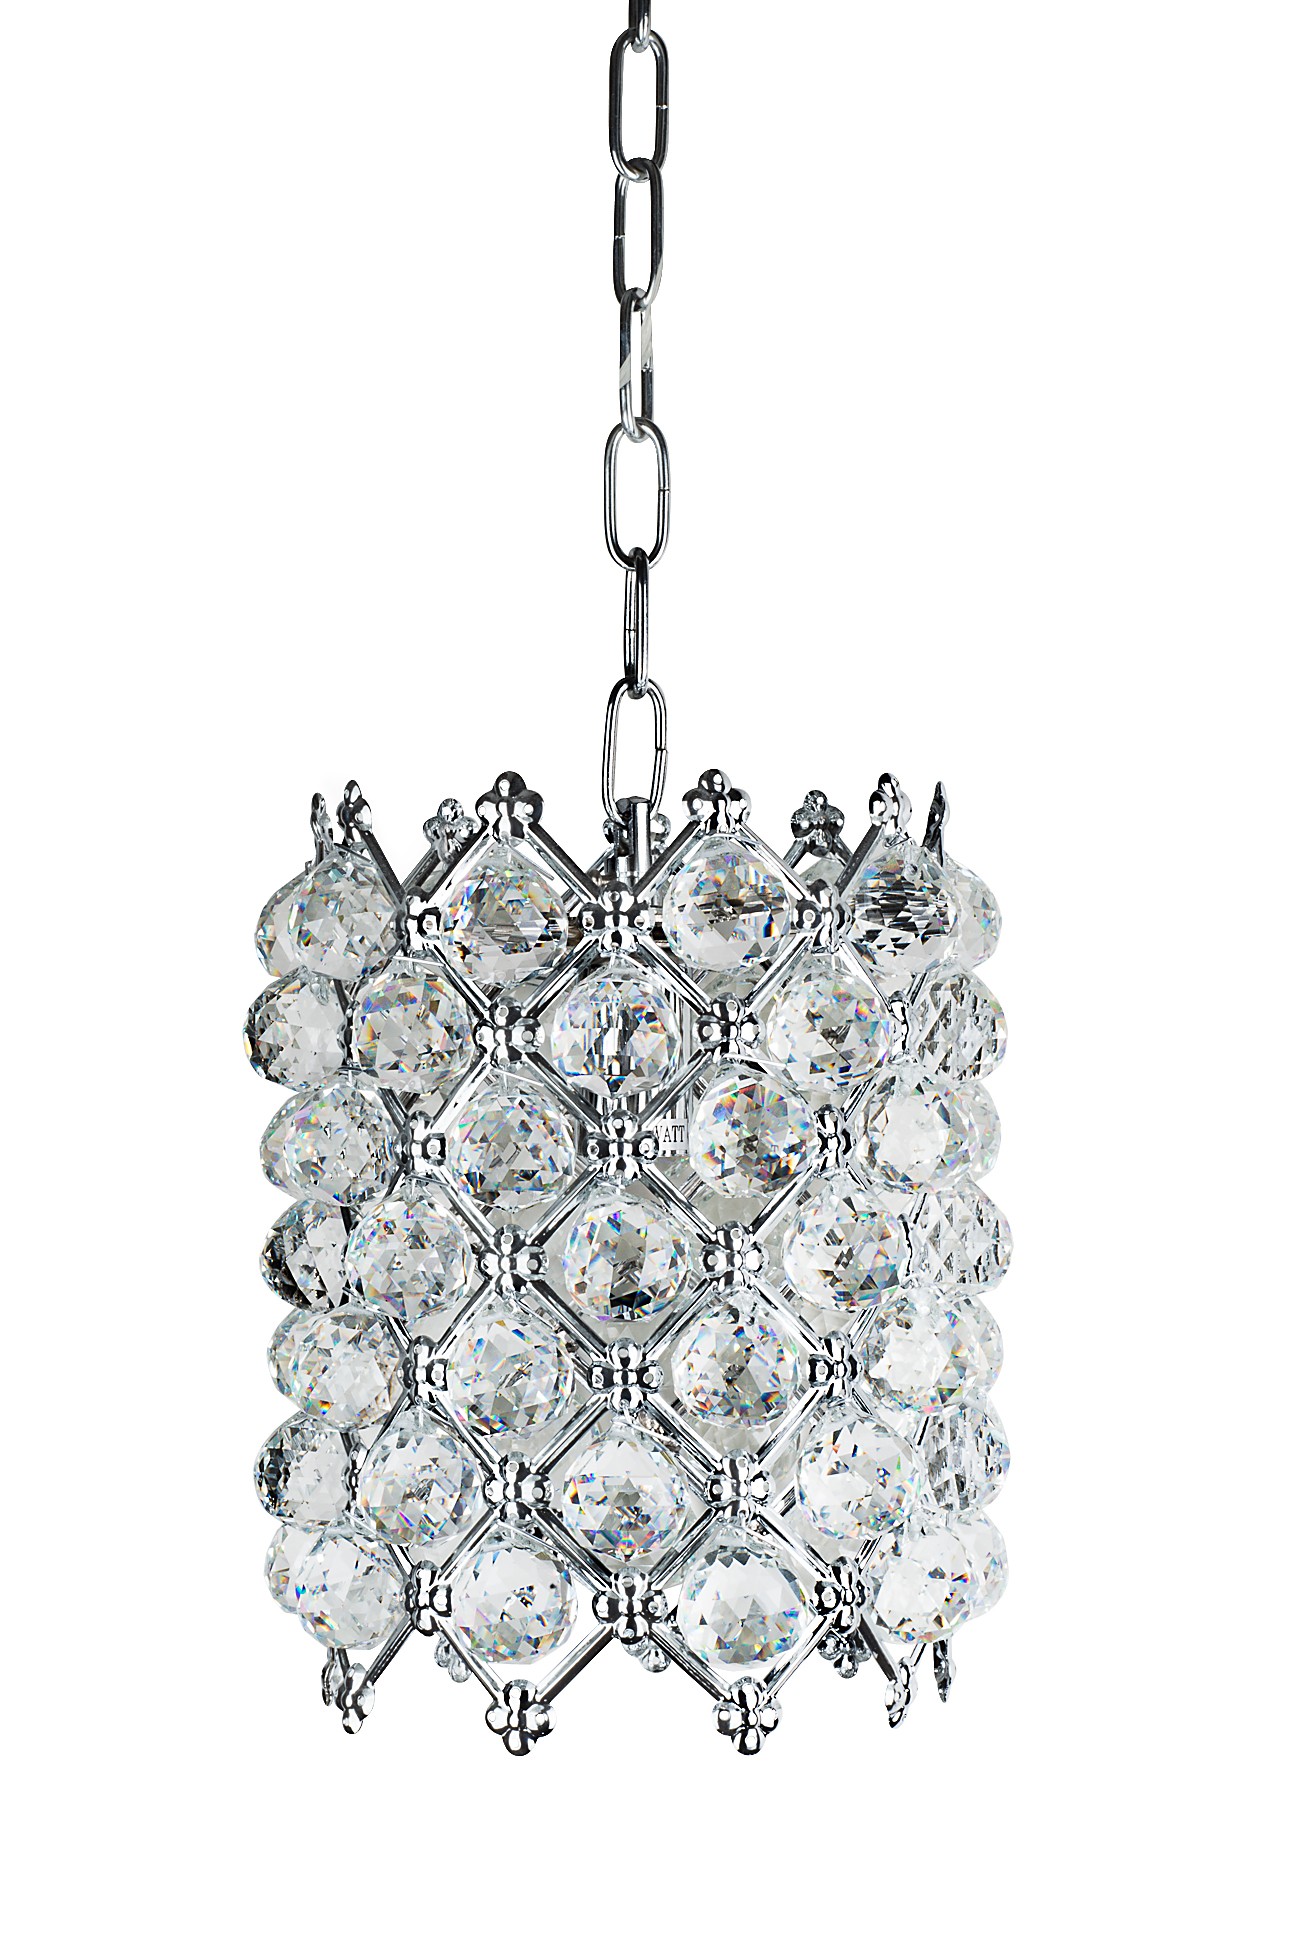 SPECTRUM COLLECTION -PENDENT -8620 CH